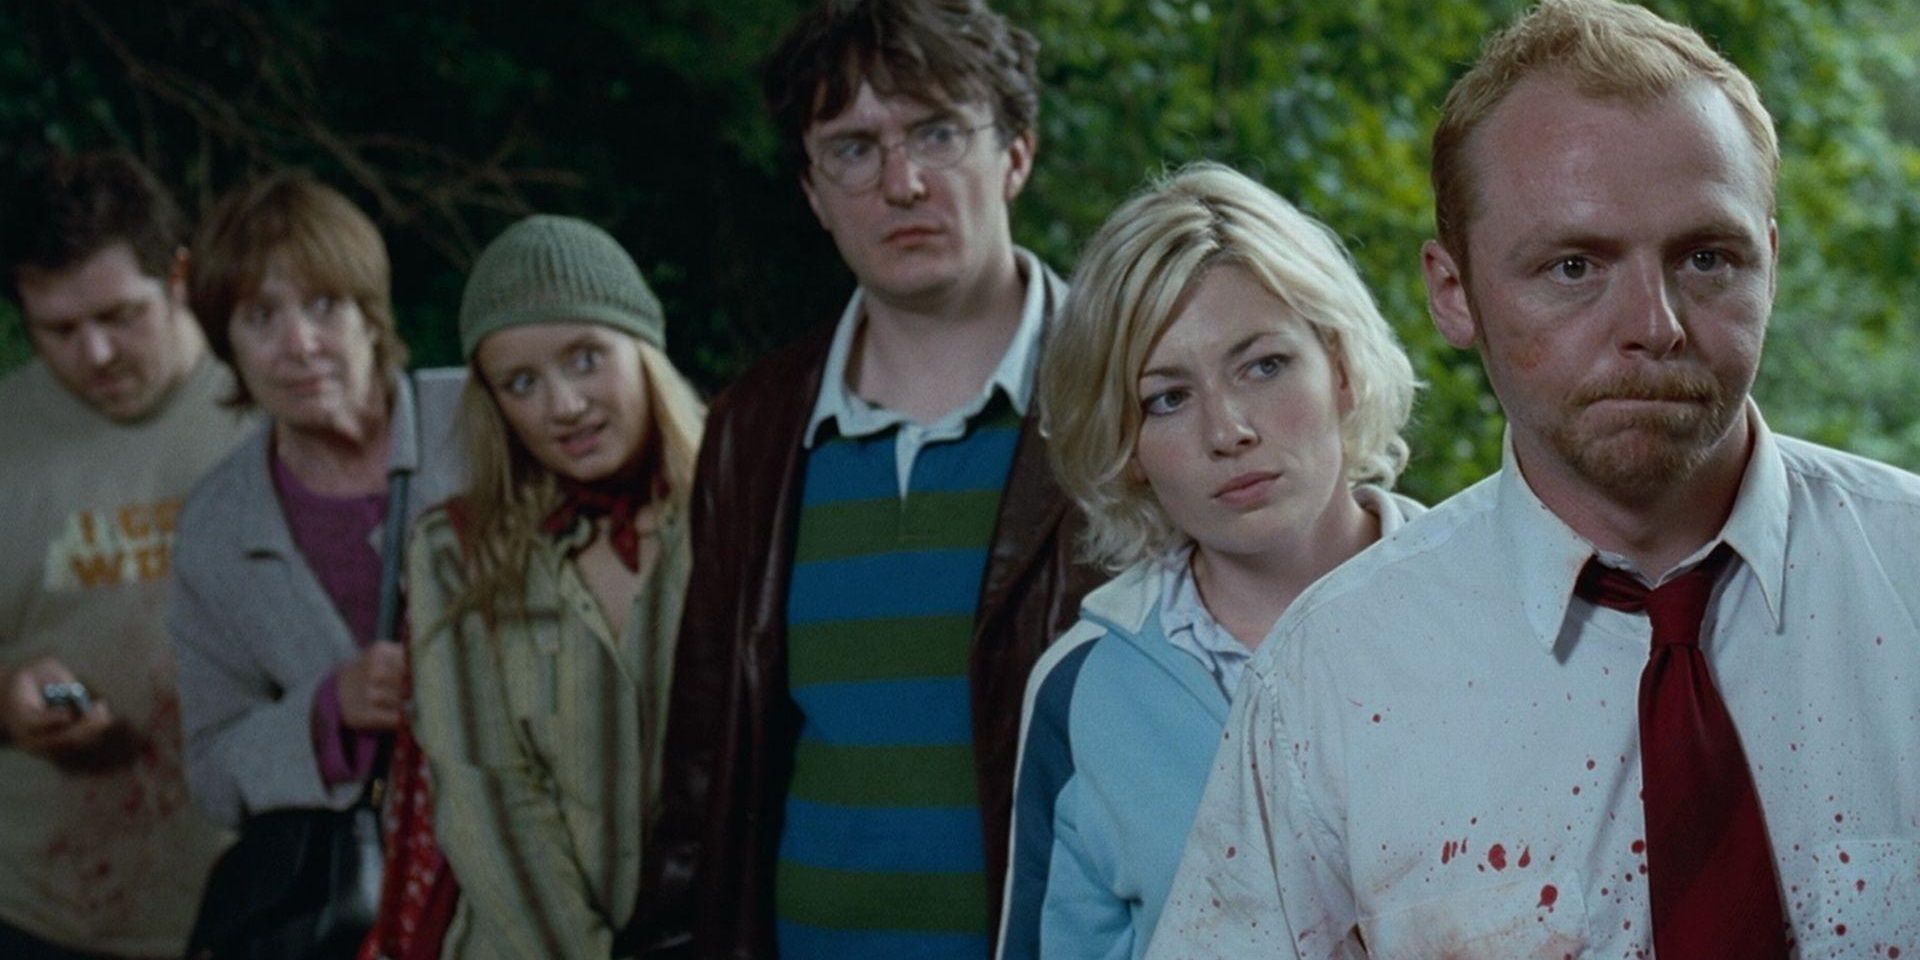 Shaun and the survivors in Shaun of the Dead